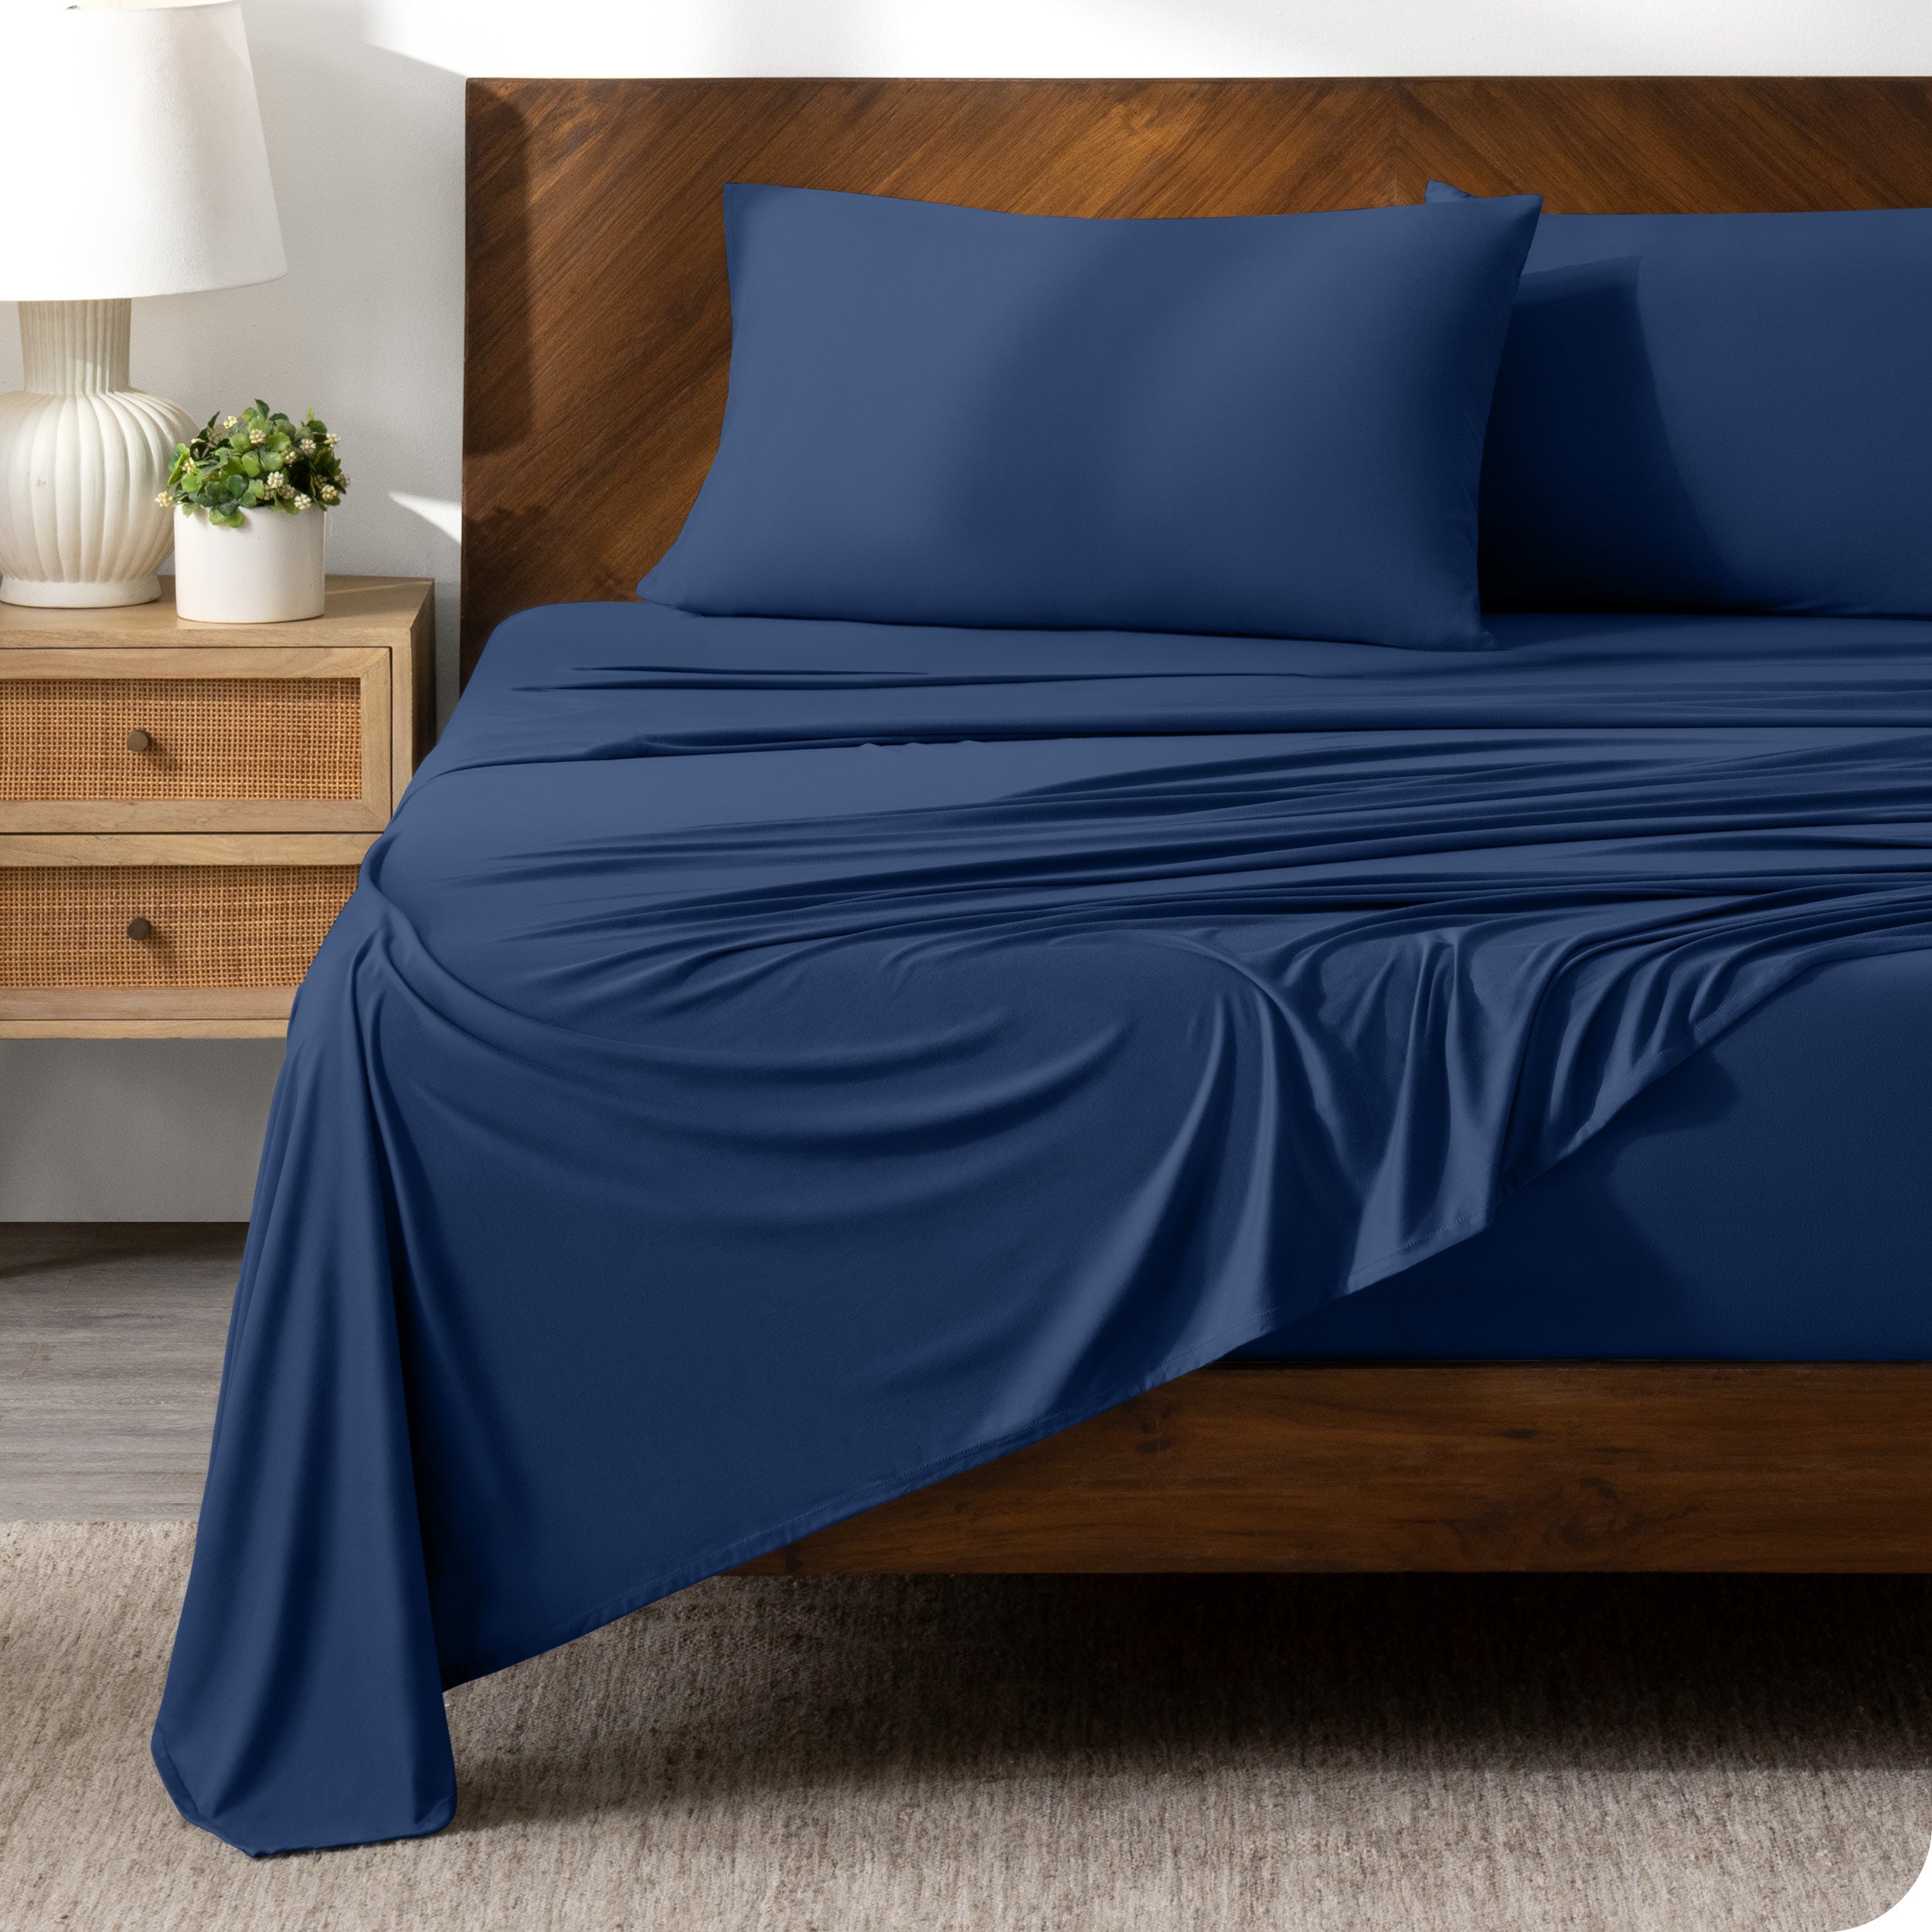 Dark Blue sheet set on a bed with a dark wooden bed frame